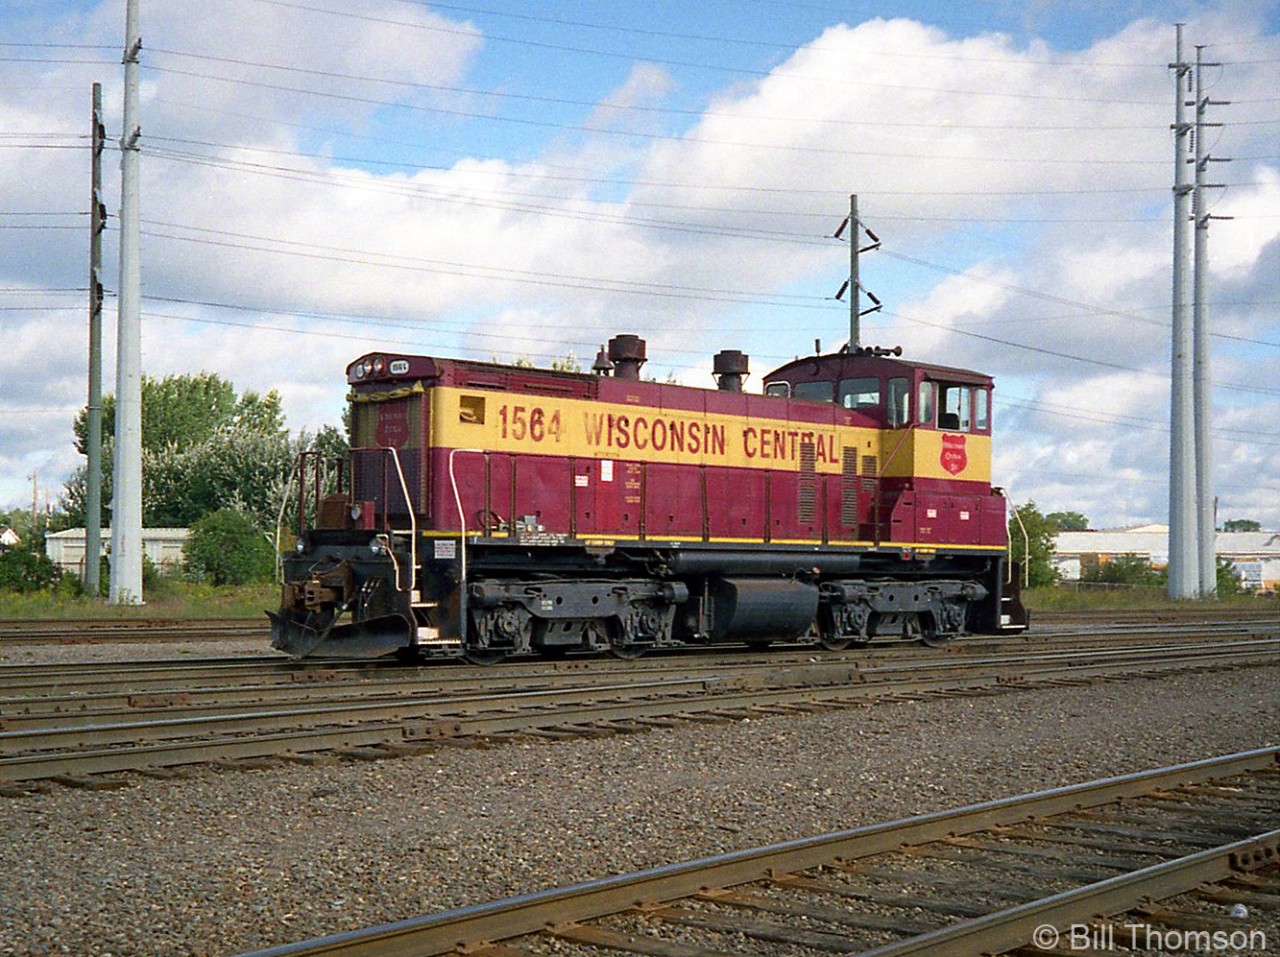 During a visit to the Algoma Central Railway to ride some of its passenger trains, a visit to Steelton Yard in Sault Ste. Marie finds Winsconsin Central SW1500 1564 sitting alone in the yard. ACR was owned by Wisconsin Central at the time, and seeing WC power was a common occurrence (this was two years before the CN takeover). 

This unit was originally built by EMD in 1971 for the Kentucky & Indiana Terminal Railroad (K&IT), and went on to work for Southern, Norfolk Southern, Wisconsin Central and finally CN where 1564 remains active today painted in the current CN livery.